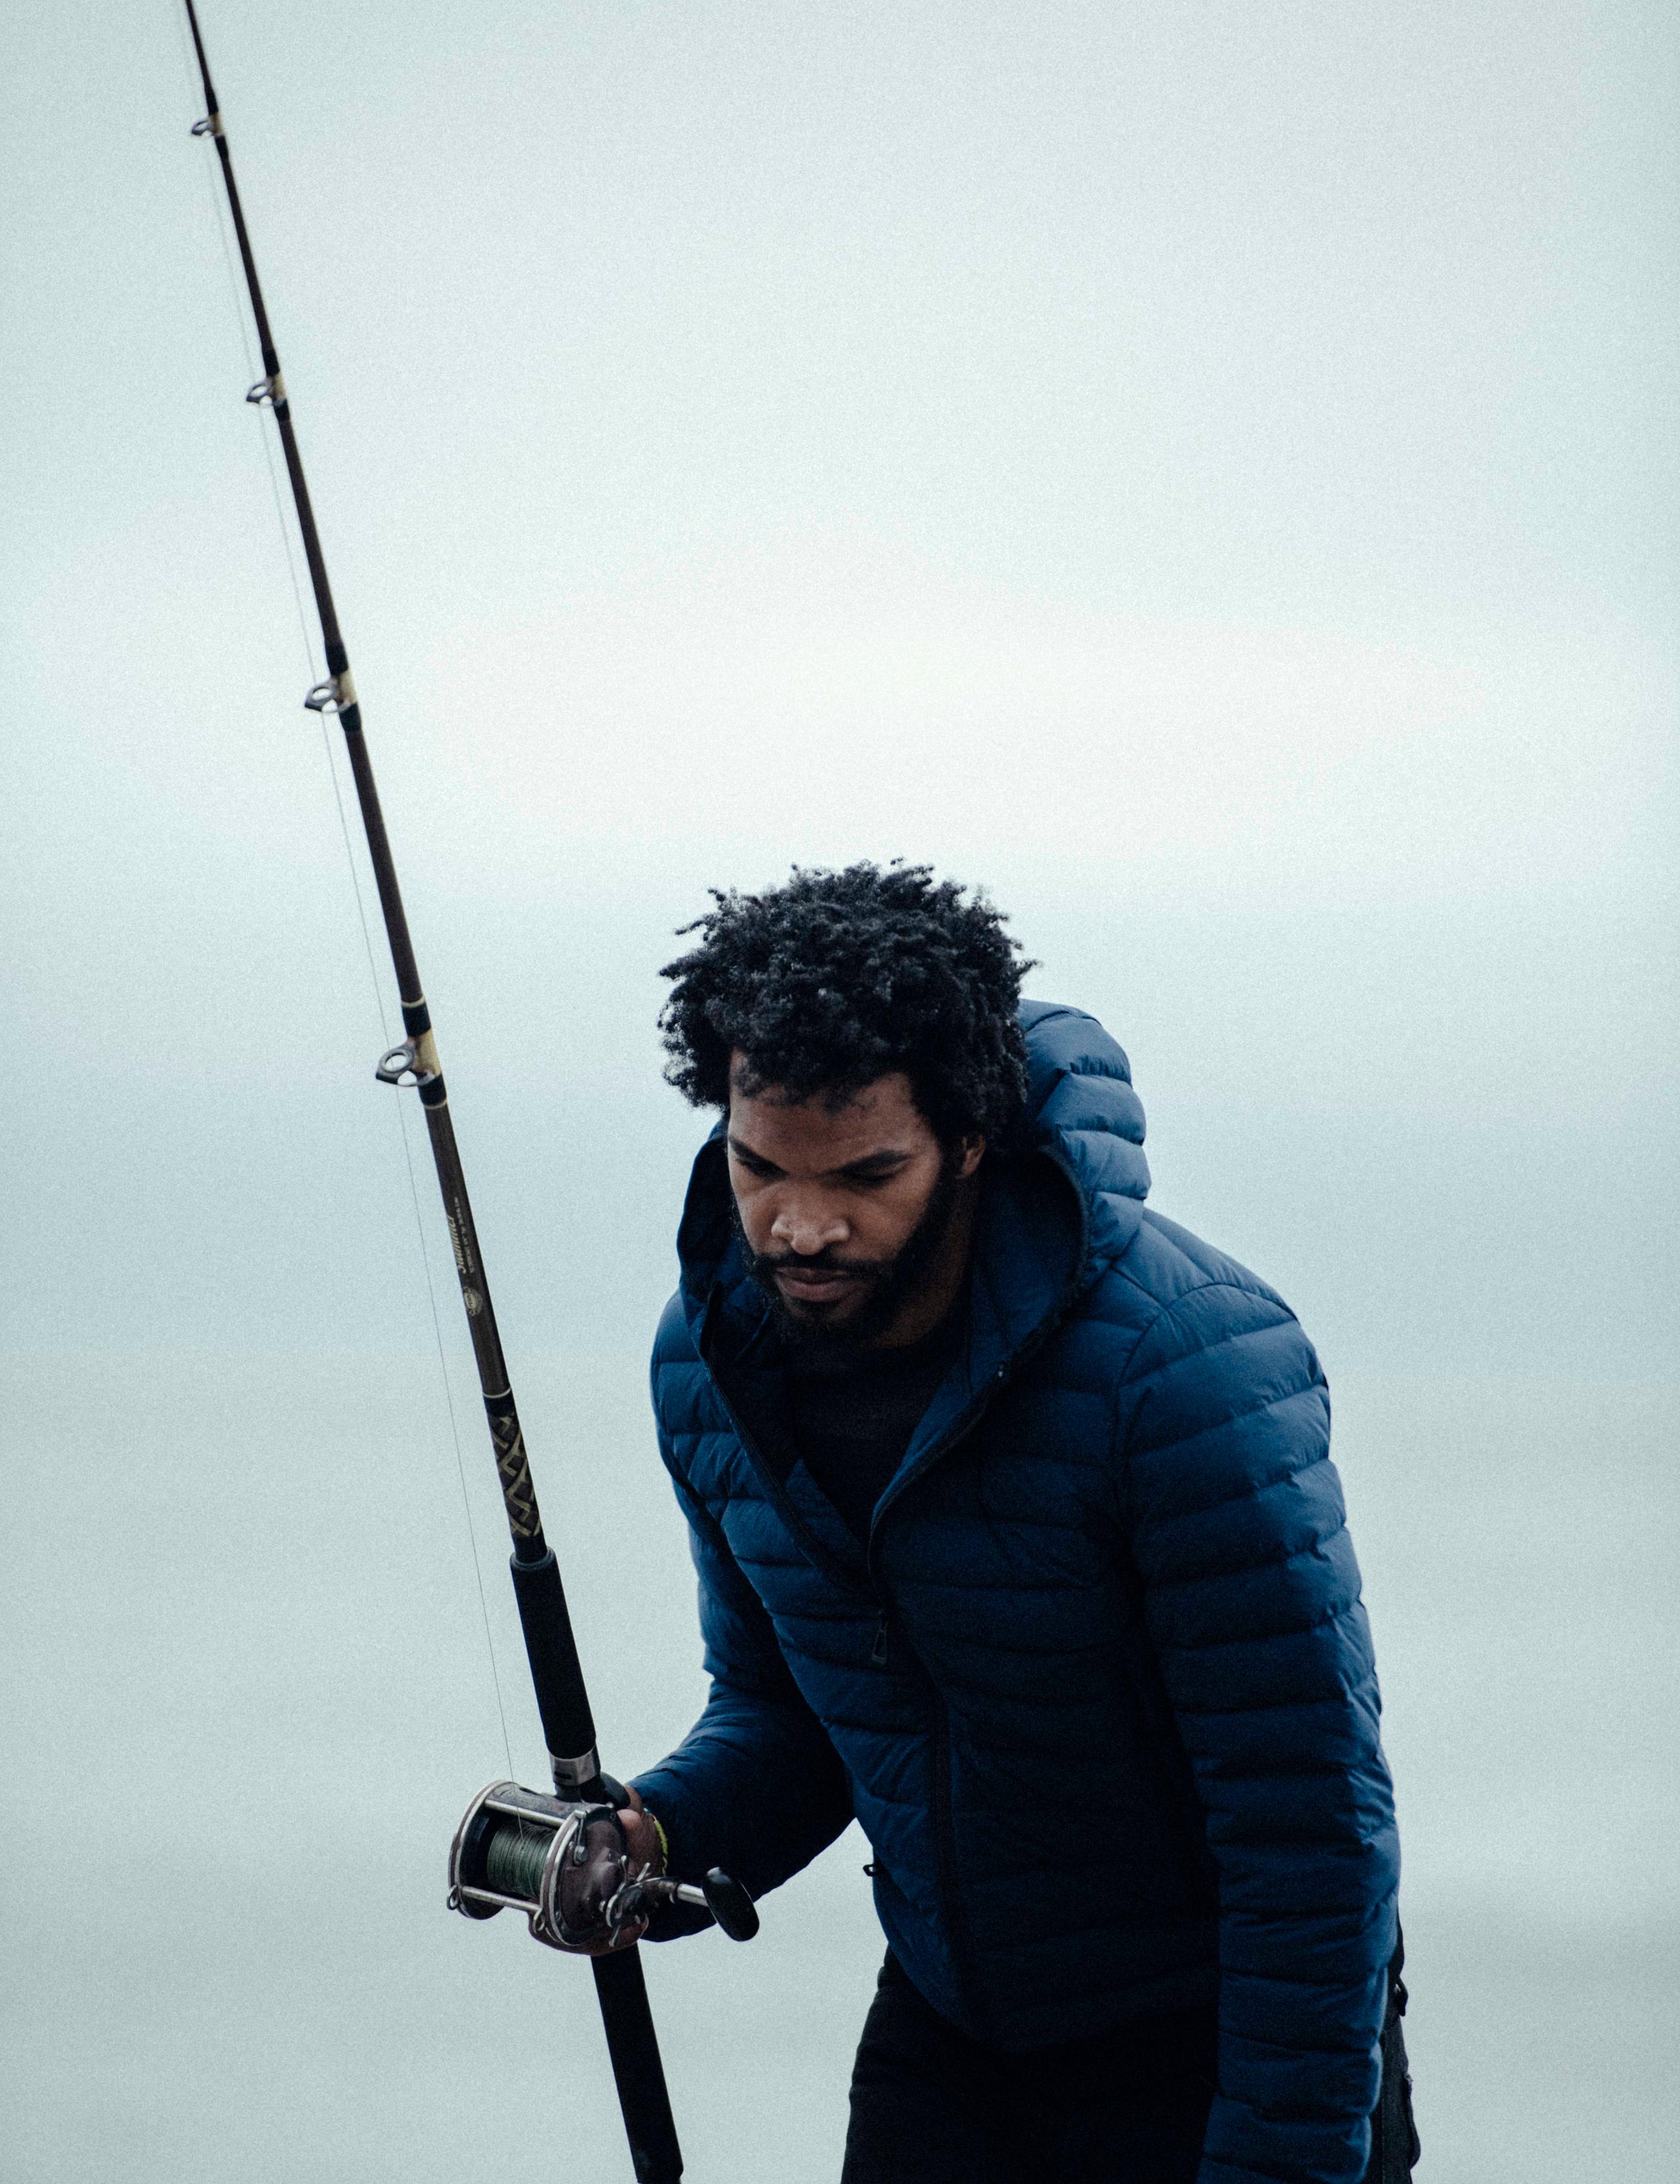 Men in Launch Jacket holding a fishing rod